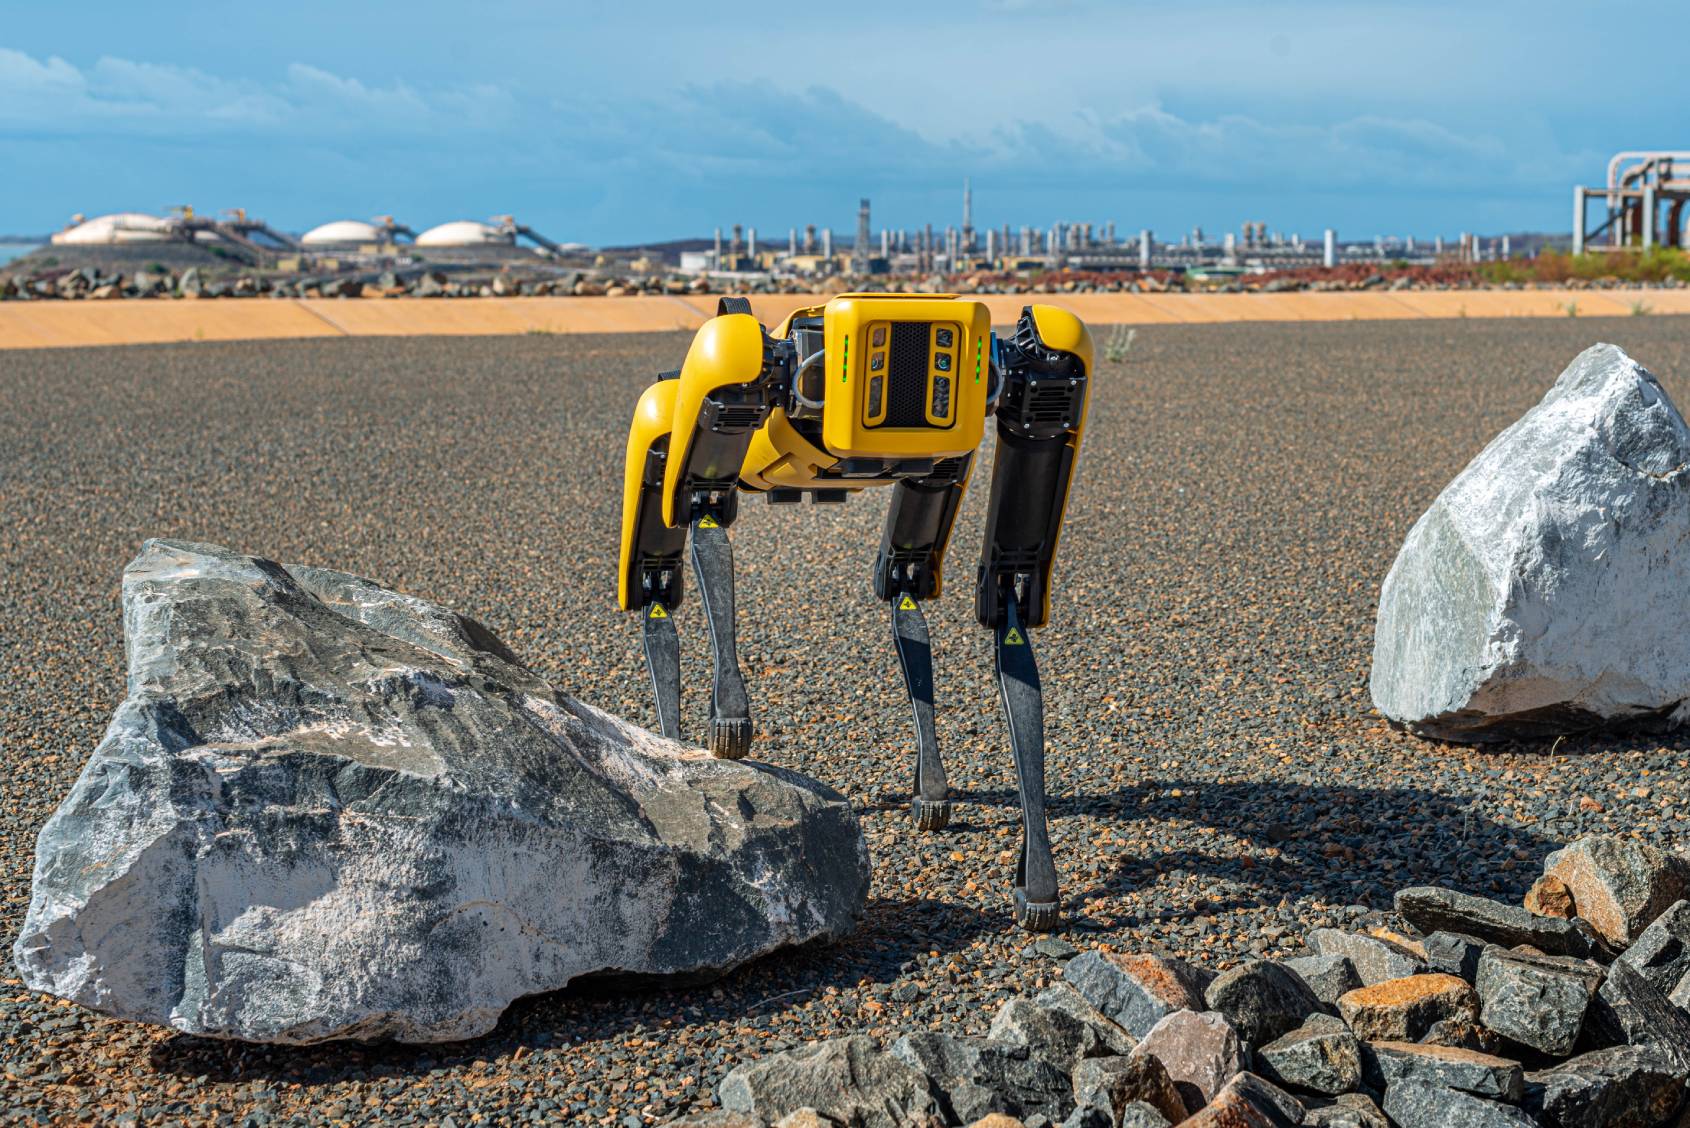 Spot working outdoors on rocky terrain at an oil and gas facility